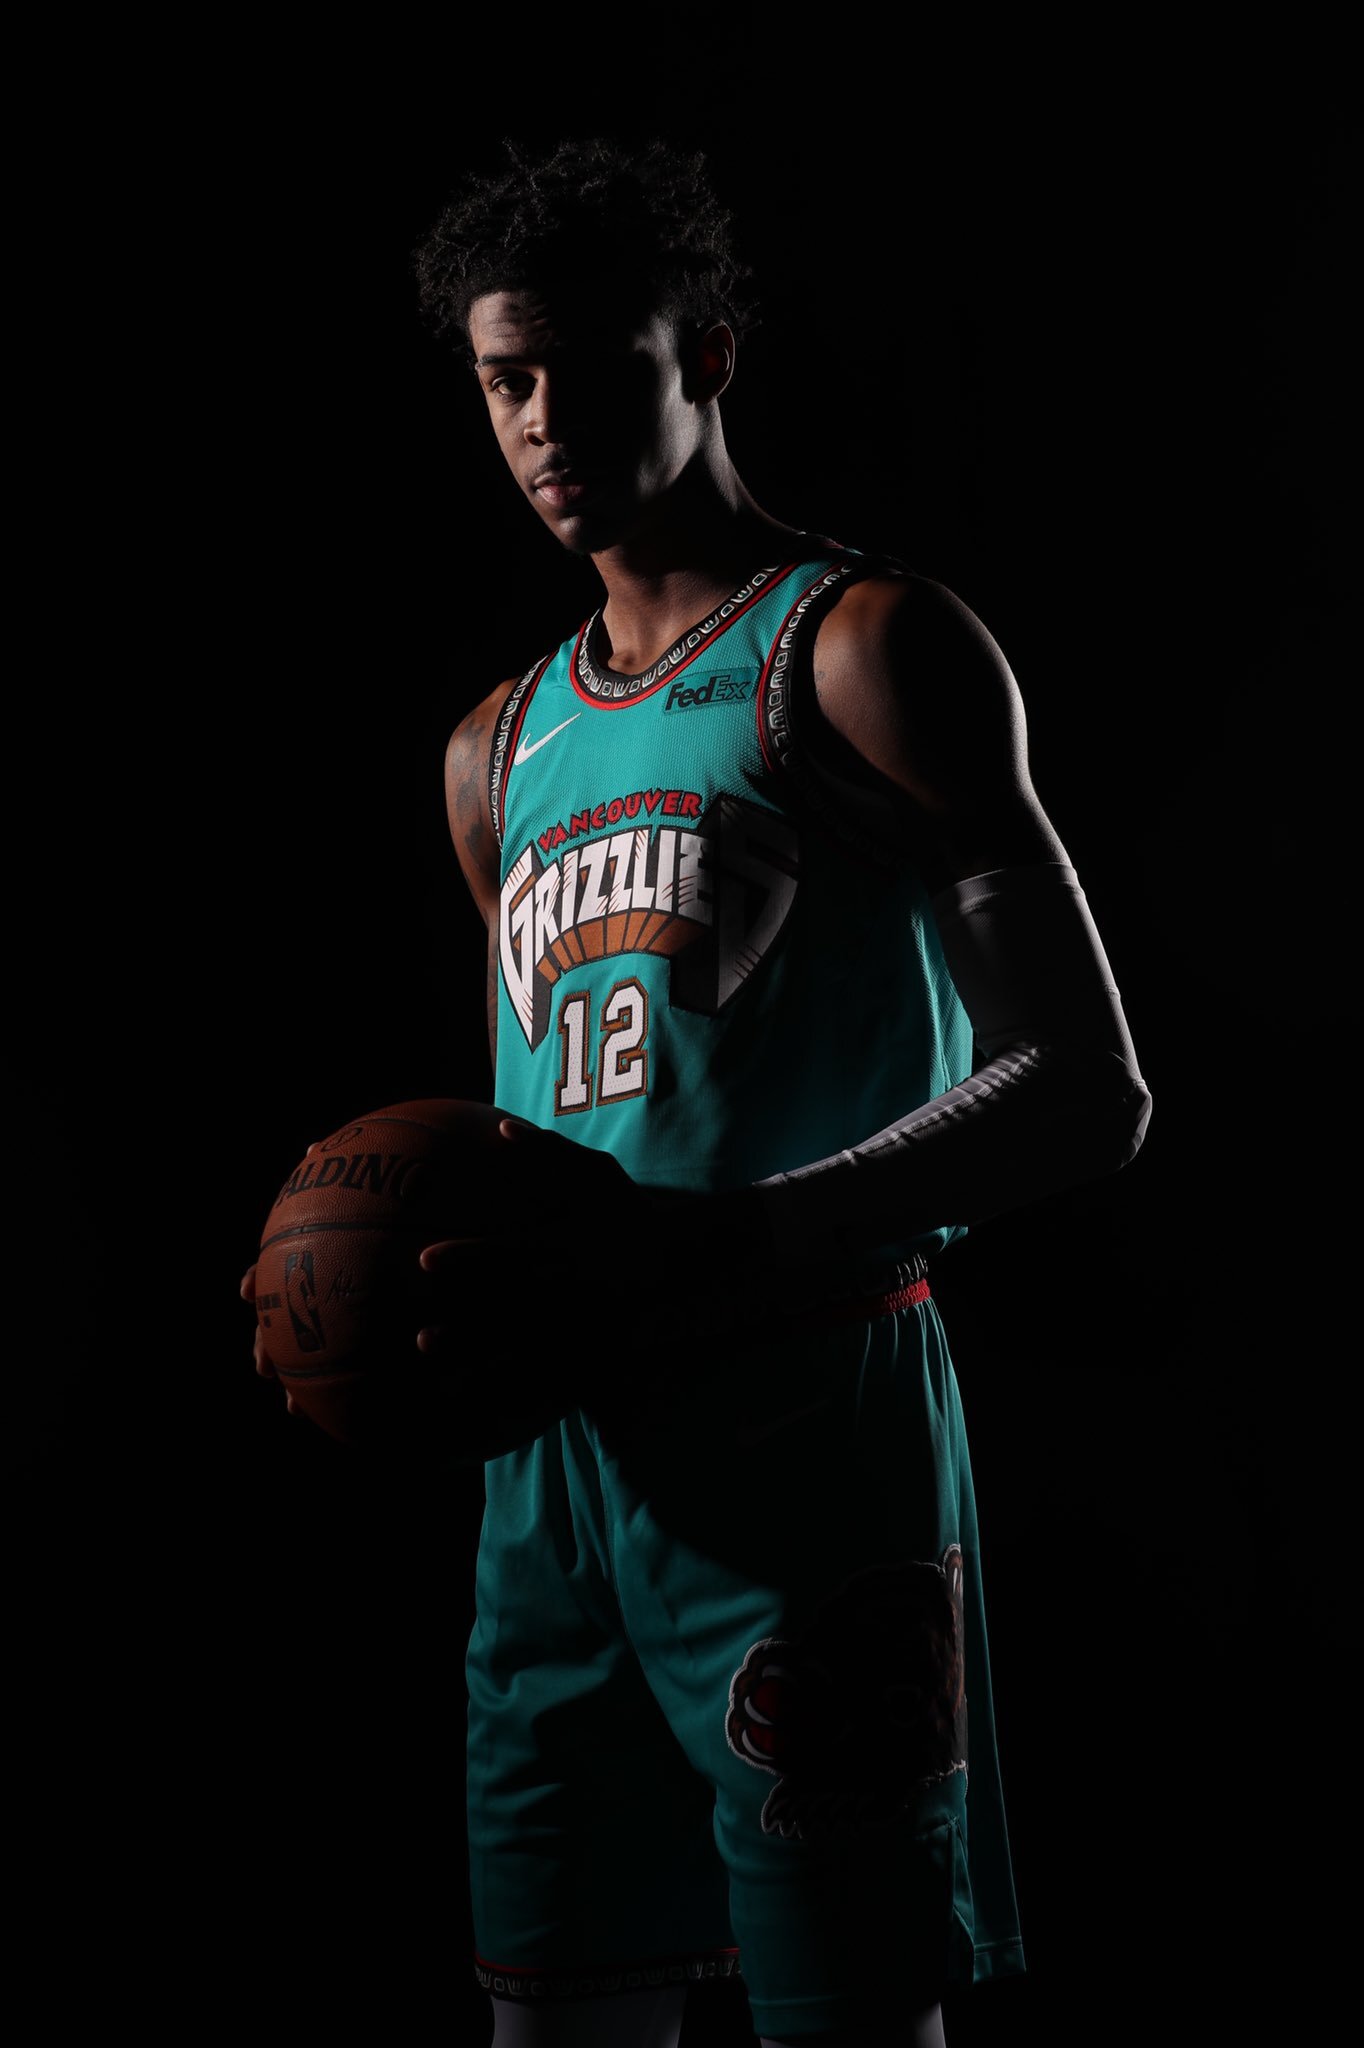 Vancouver Grizzlies 25th Anniversary Throwback Court Photos Photo Gallery